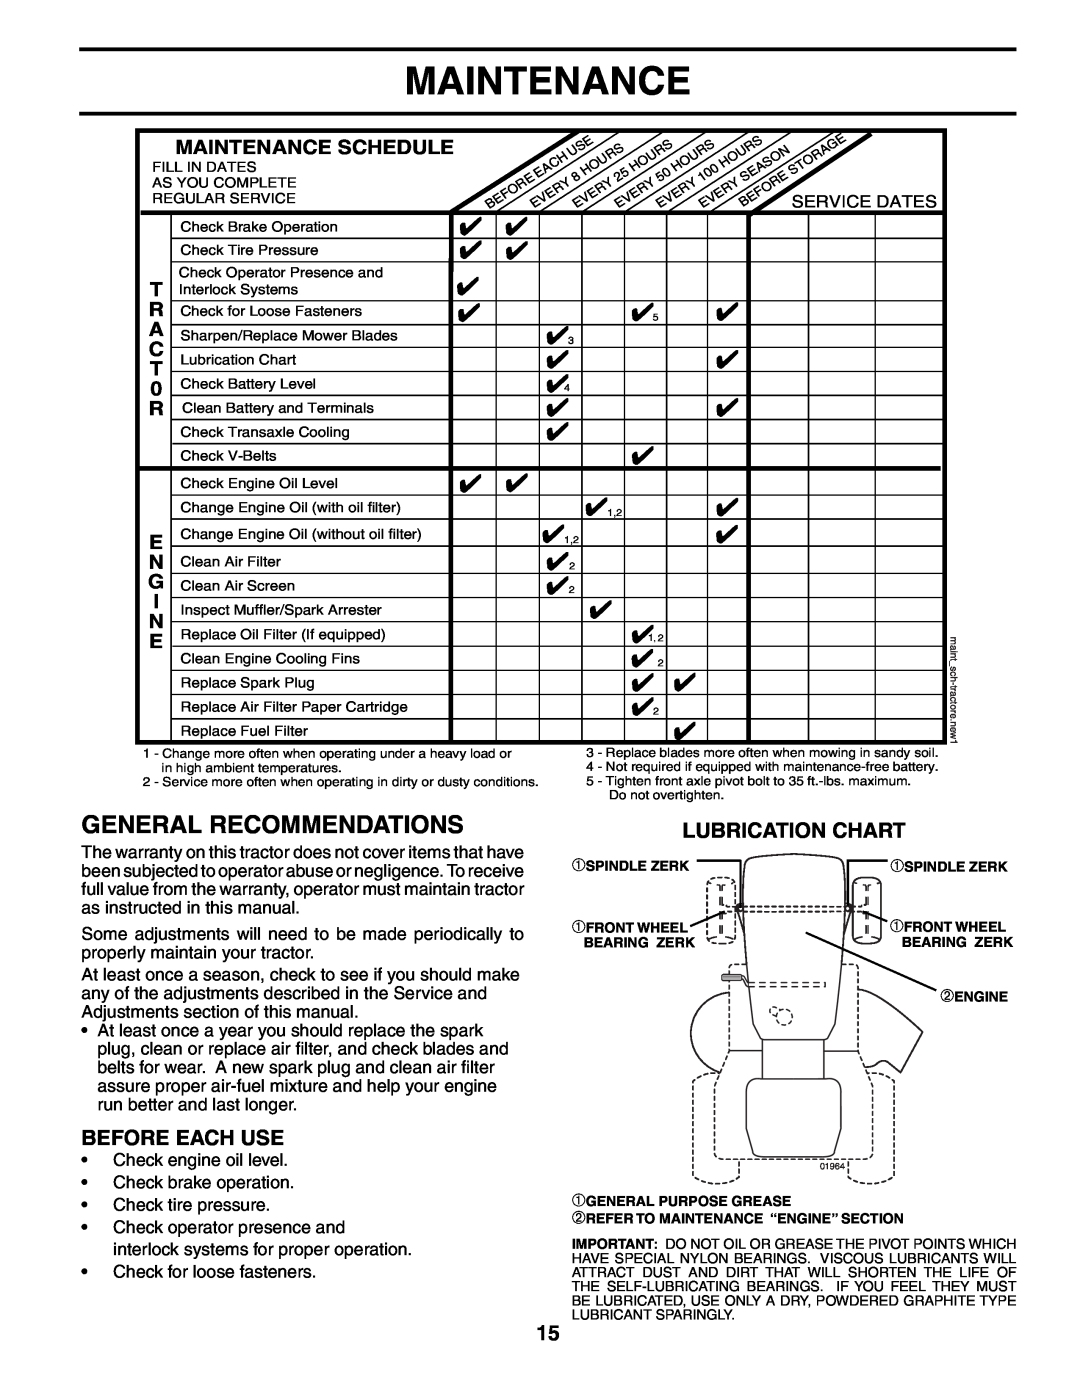 Poulan PO175H42STA manual General Recommendations, Before Each Use, Lubrication Chart, Maintenance Schedule 